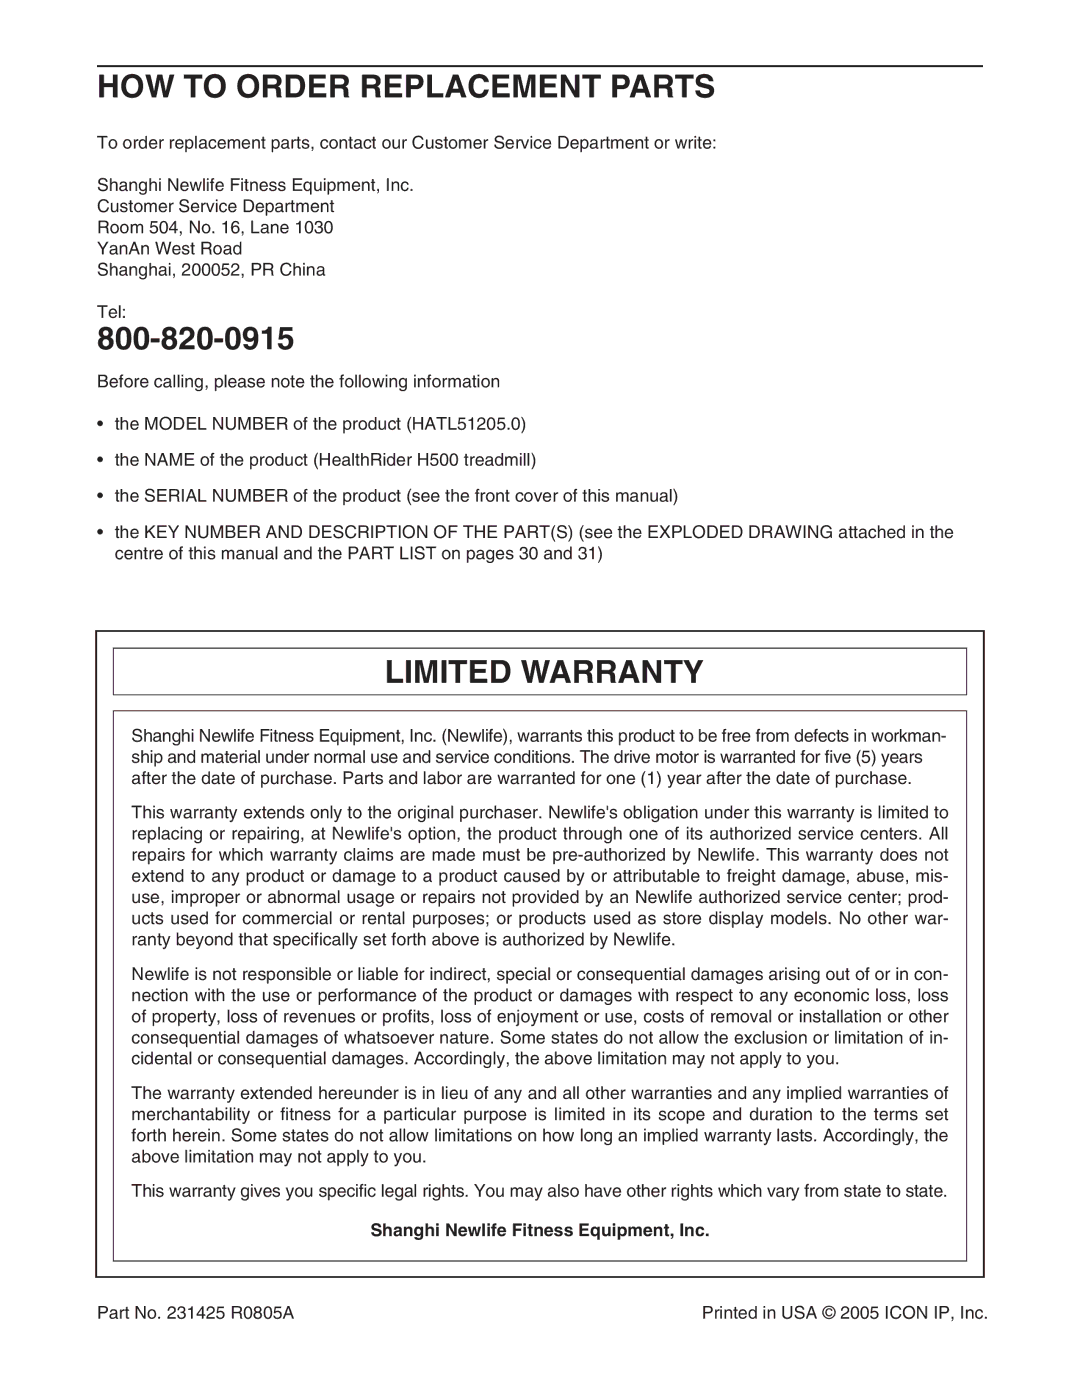 Healthrider HATL51205.0 manual HOW to Order Replacement Parts, Limited Warranty, Shanghi Newlife Fitness Equipment, Inc 